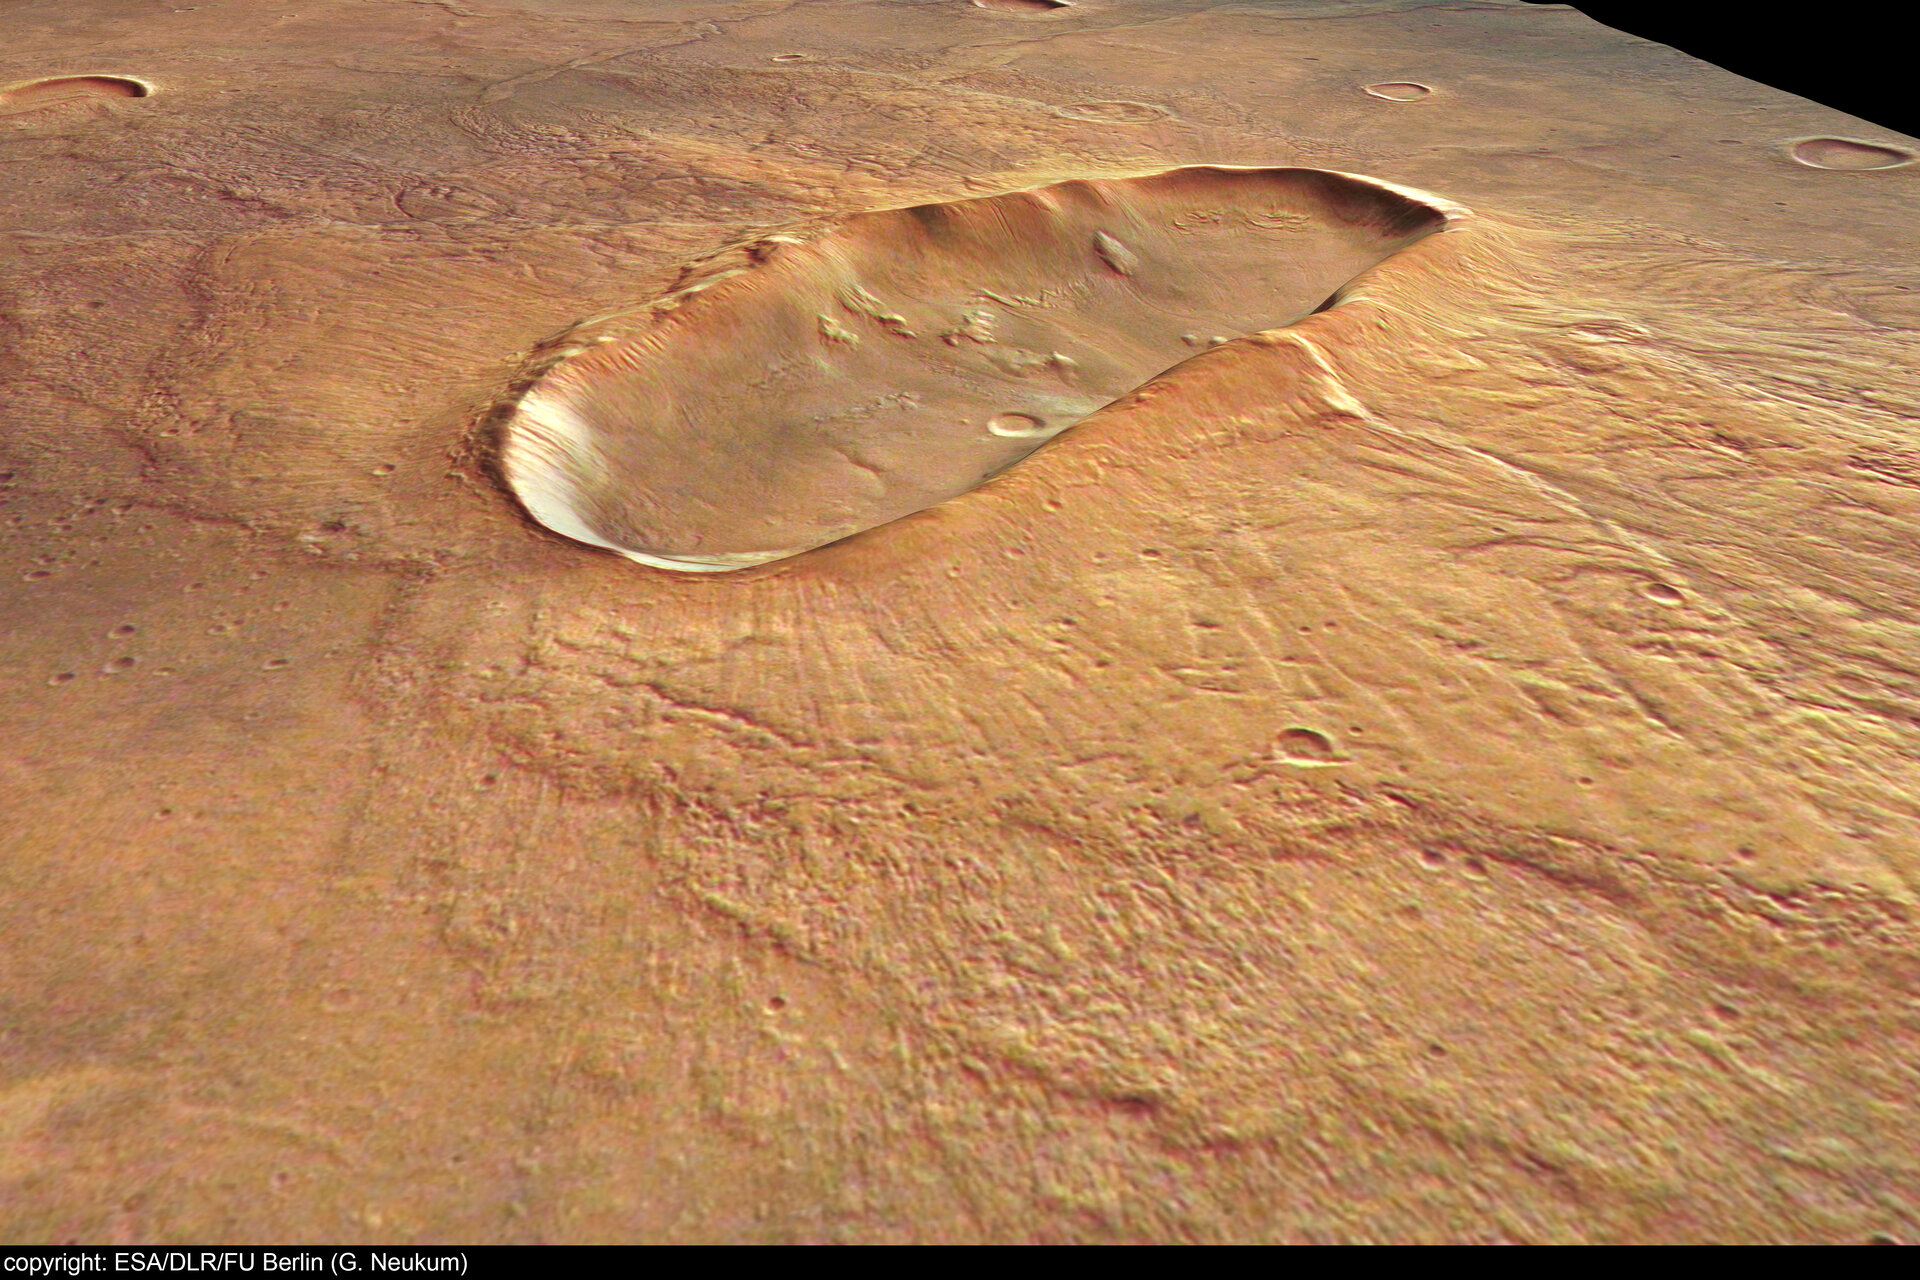 Close-up perspective view of 'butterfly' crater - looking north